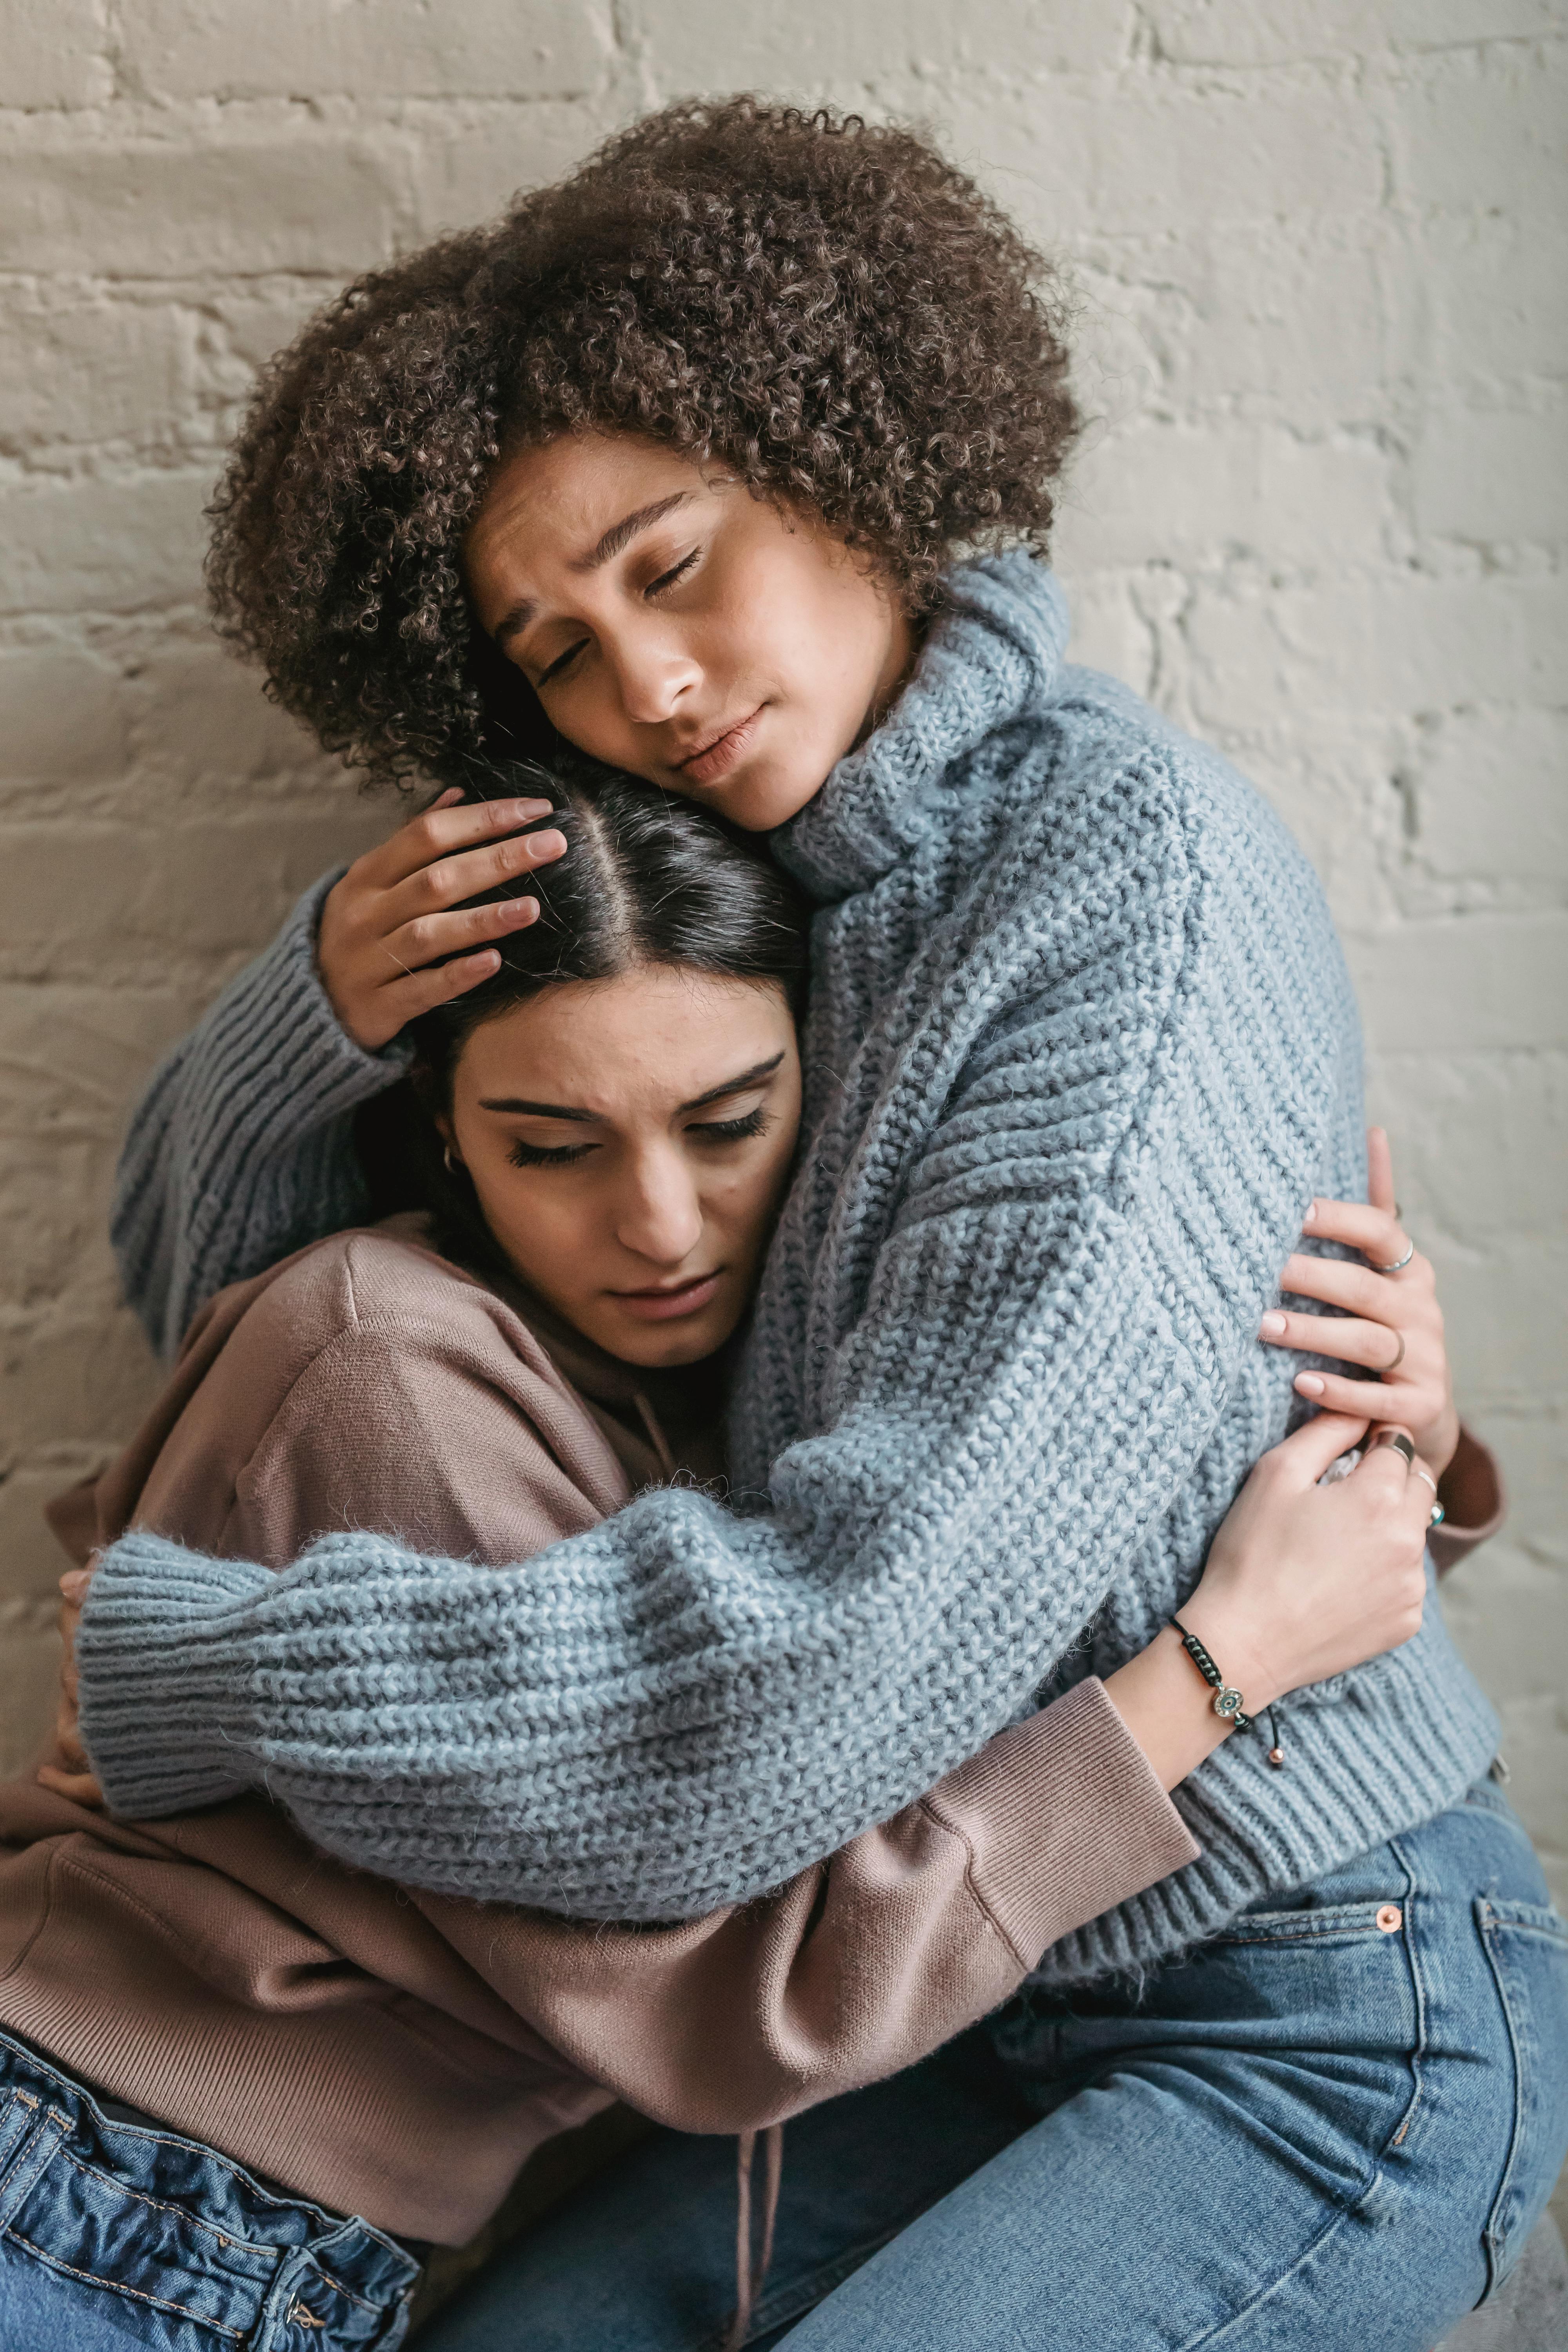 A young woman hugging her upset friend | Source: Liza Summer on Pexels